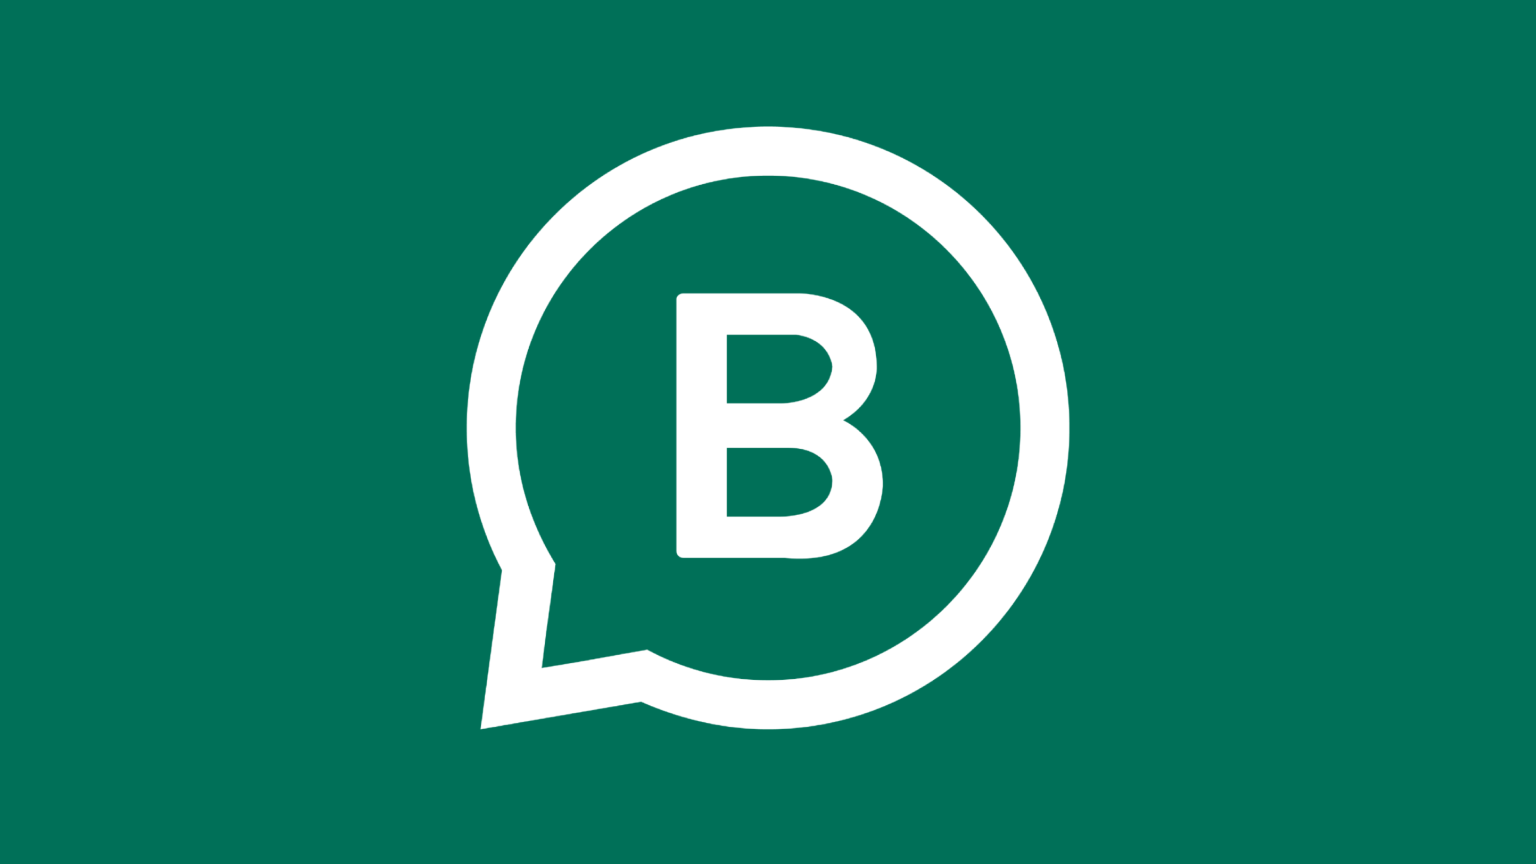 How to Make a WhatsApp Business Account For Your Company